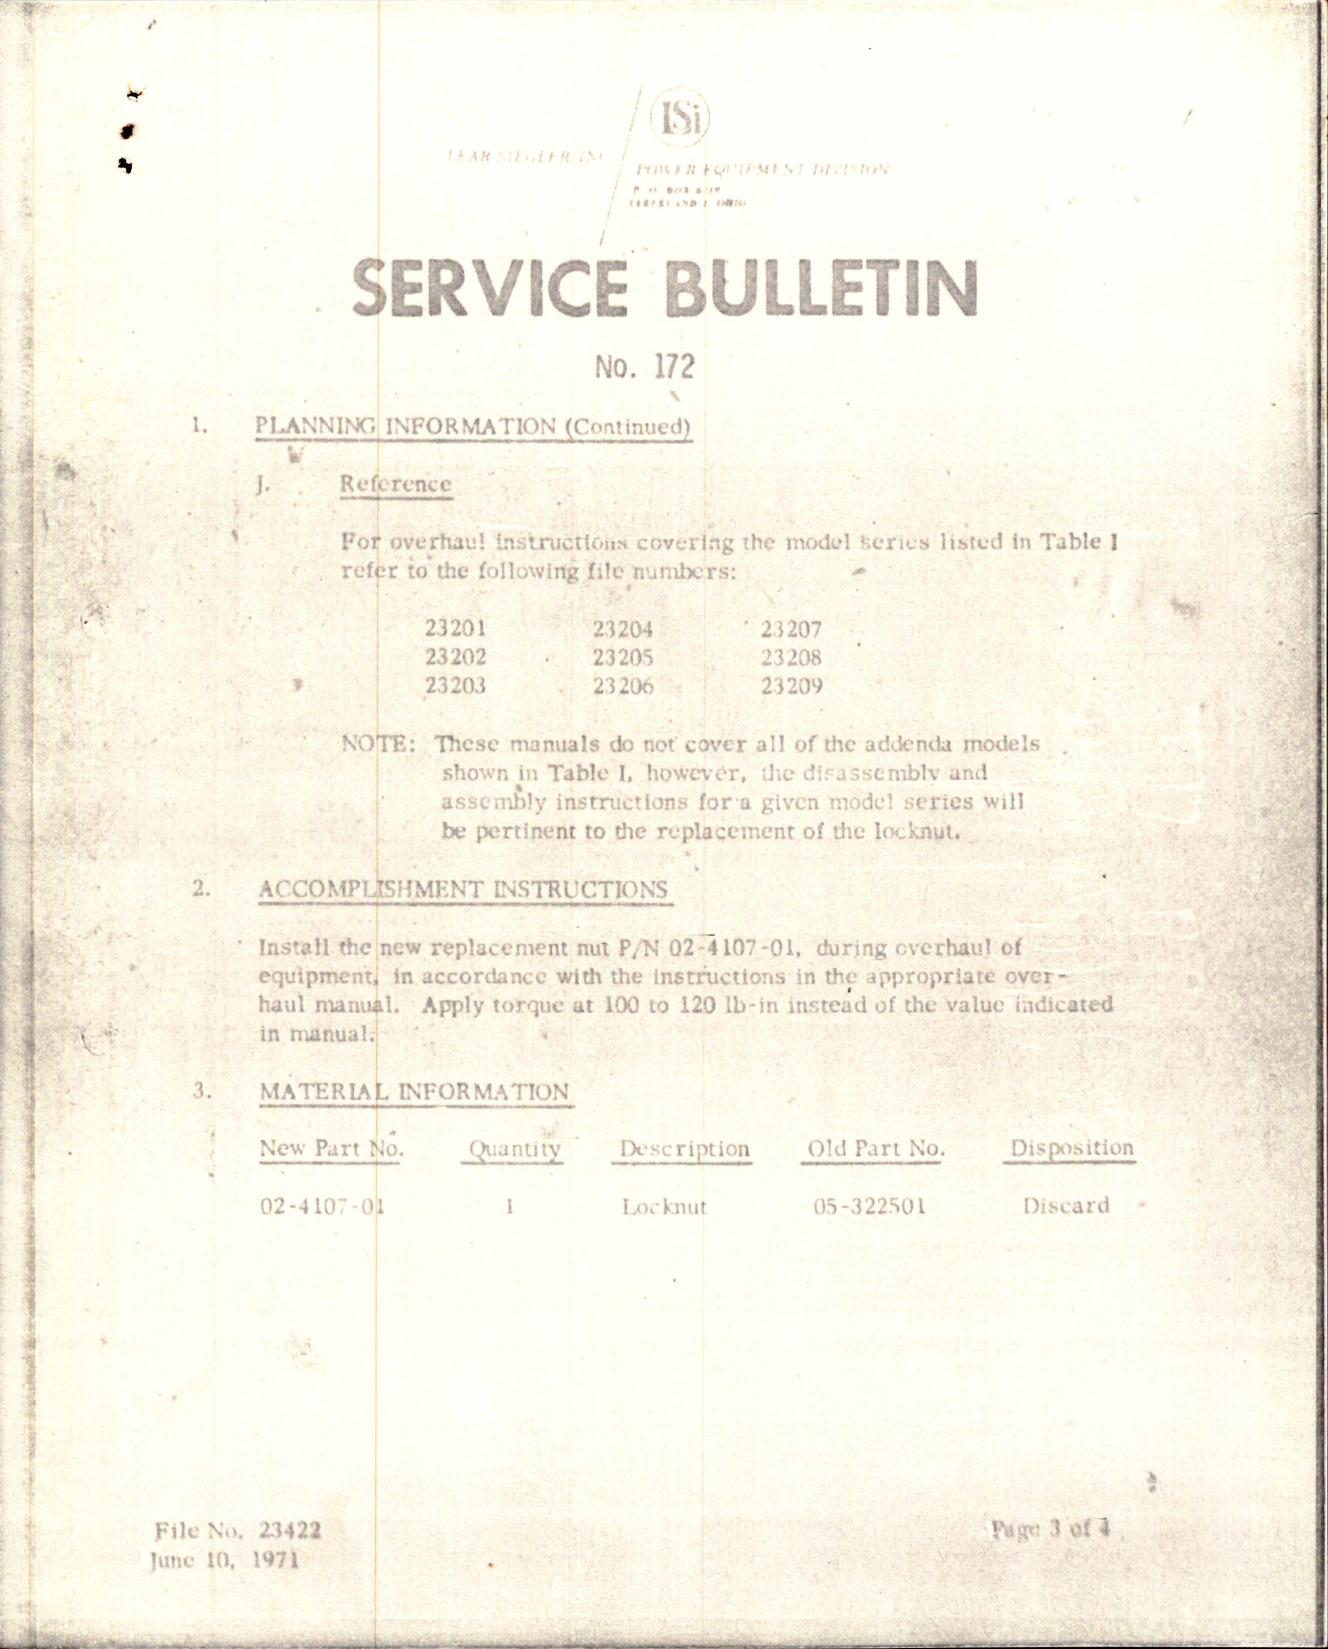 Sample page 5 from AirCorps Library document: Service Bulletin No. 172 for Replacement of Electrical Power Fan Locknut on LSI/PED Starter Generators